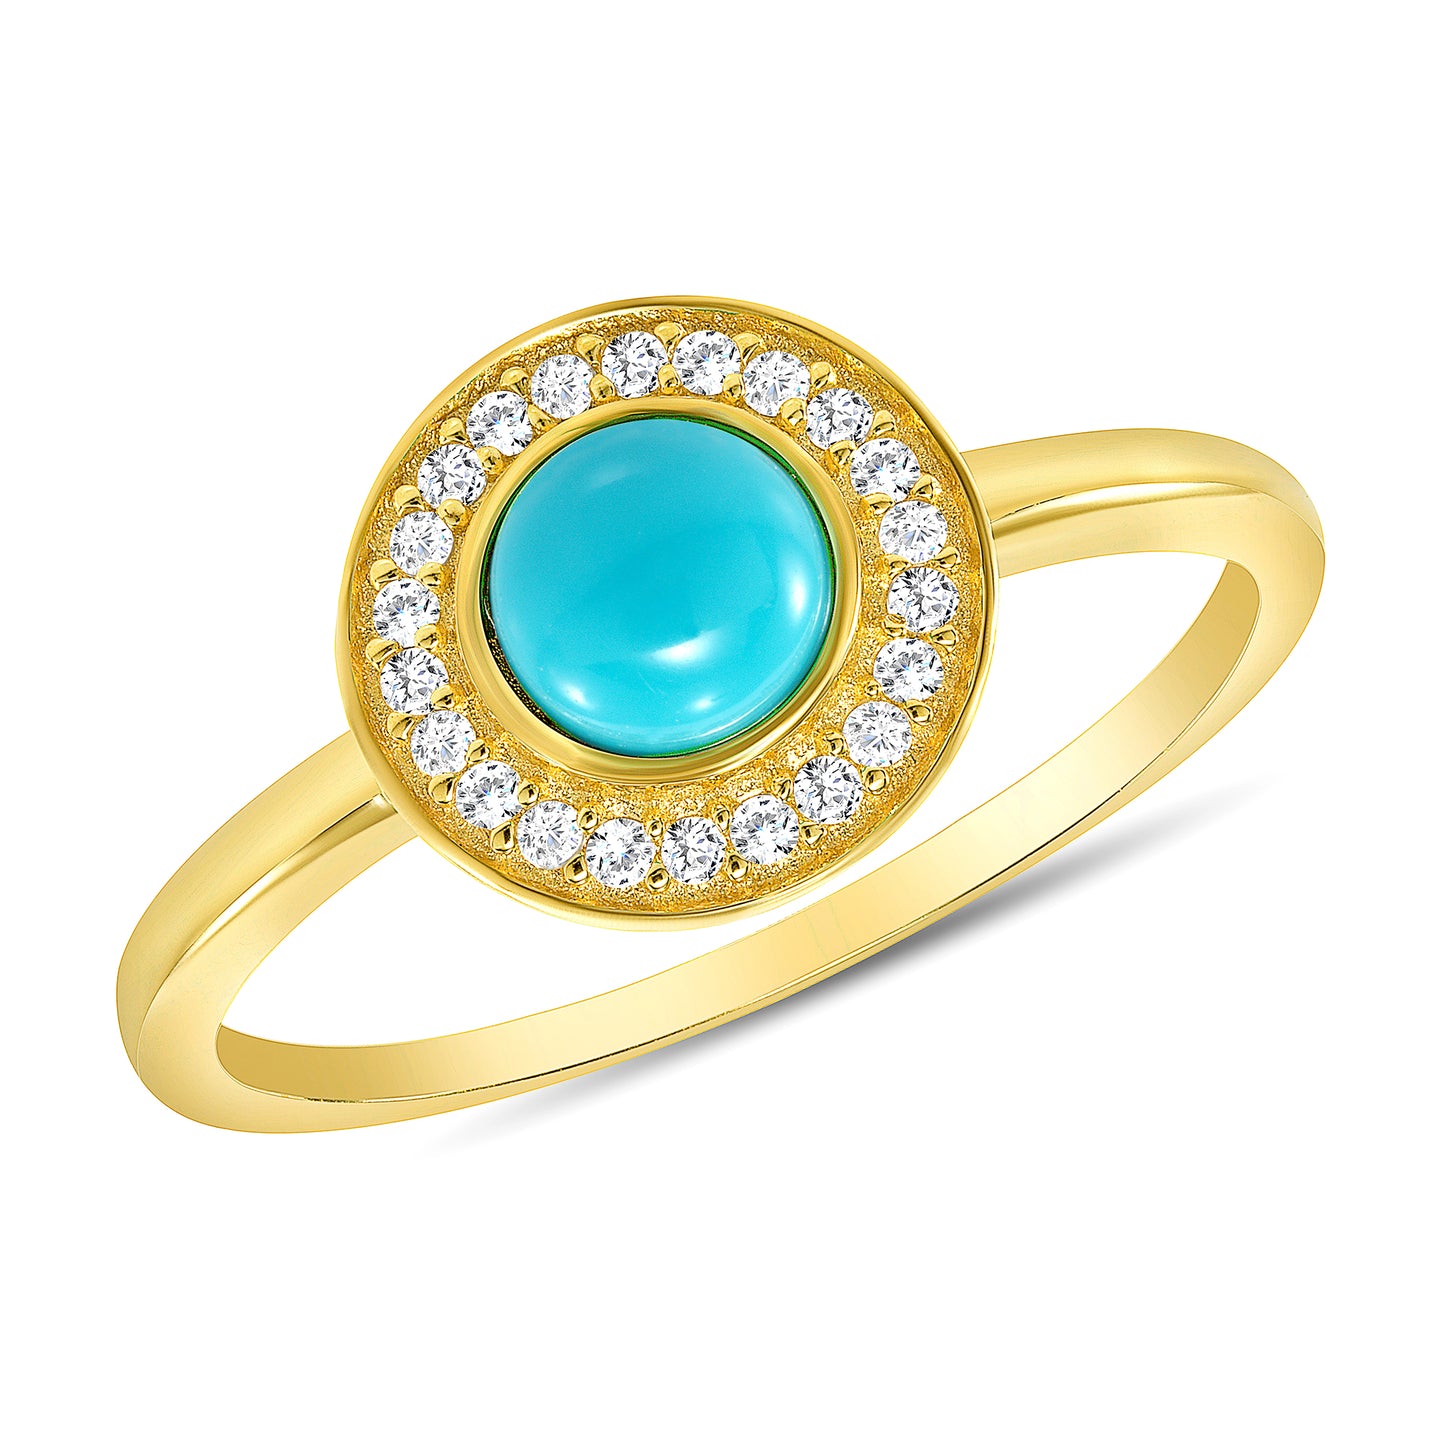 DGR1653. Silver 925 Gold Plated Cubic Zirconia with Turquoise Stone  Ring